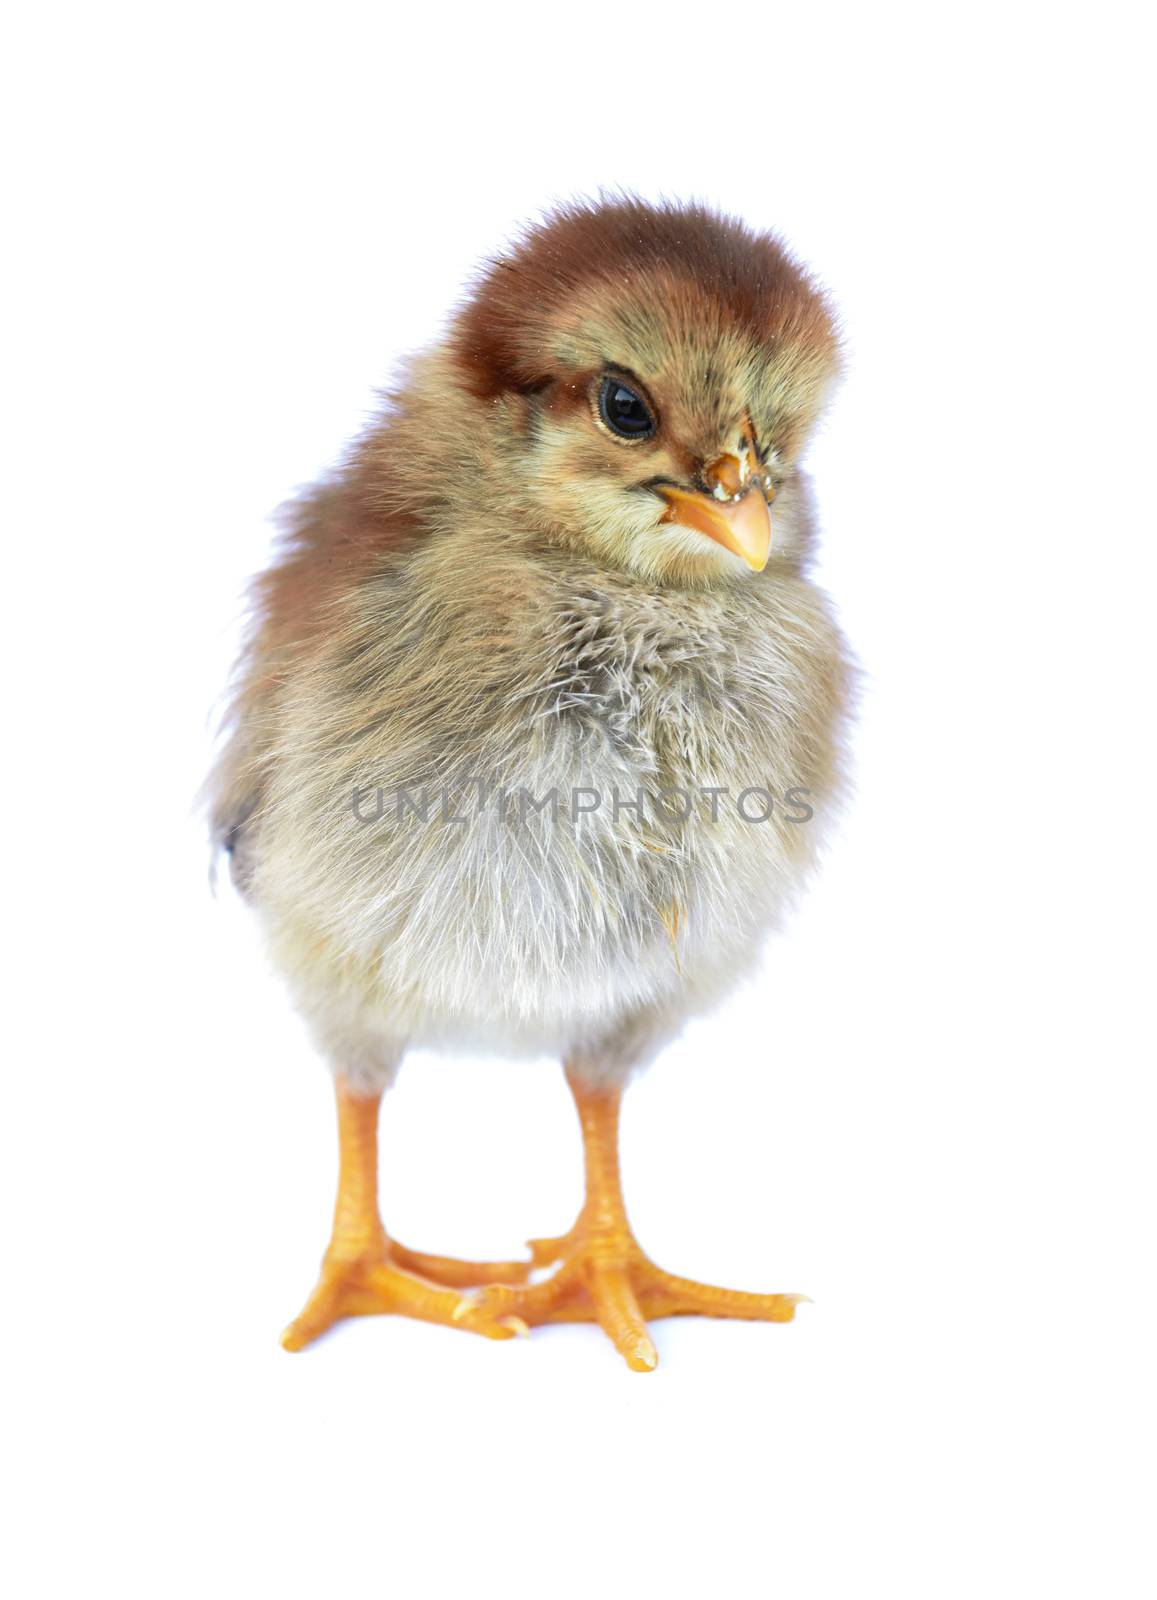 baby chicken by pioneer111